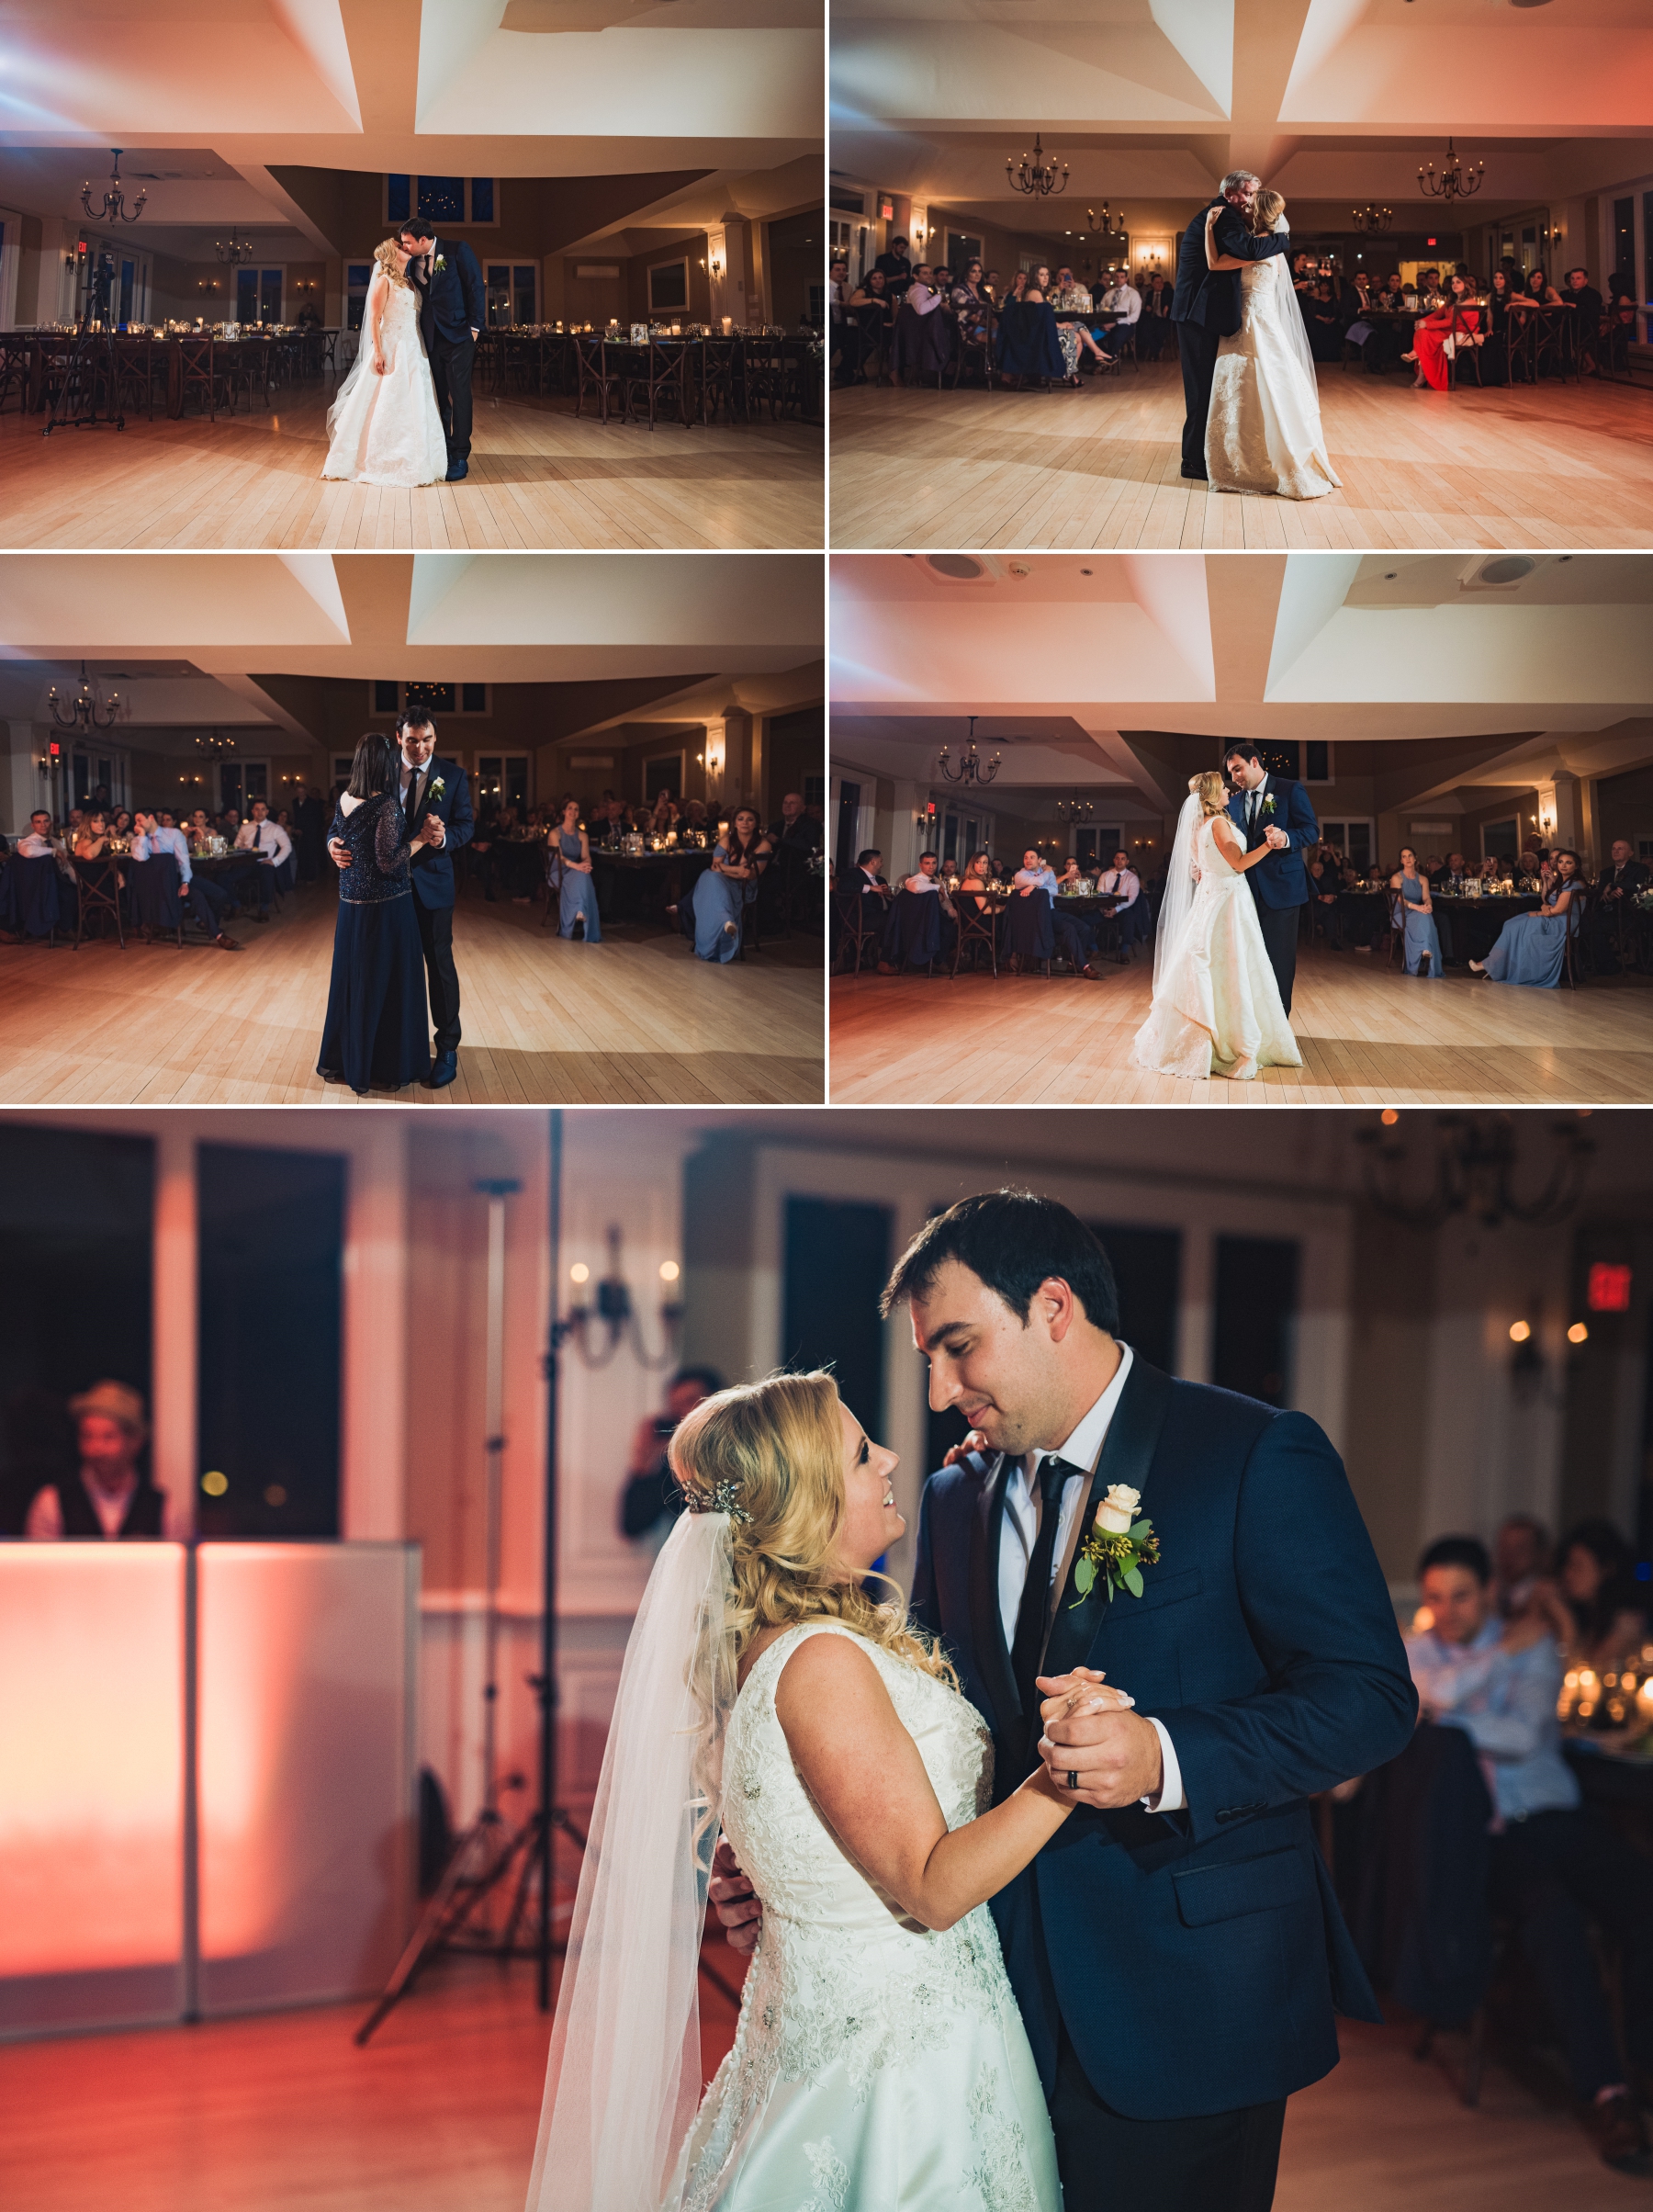  First dances, with Tara and Zach, as well as their parents. 